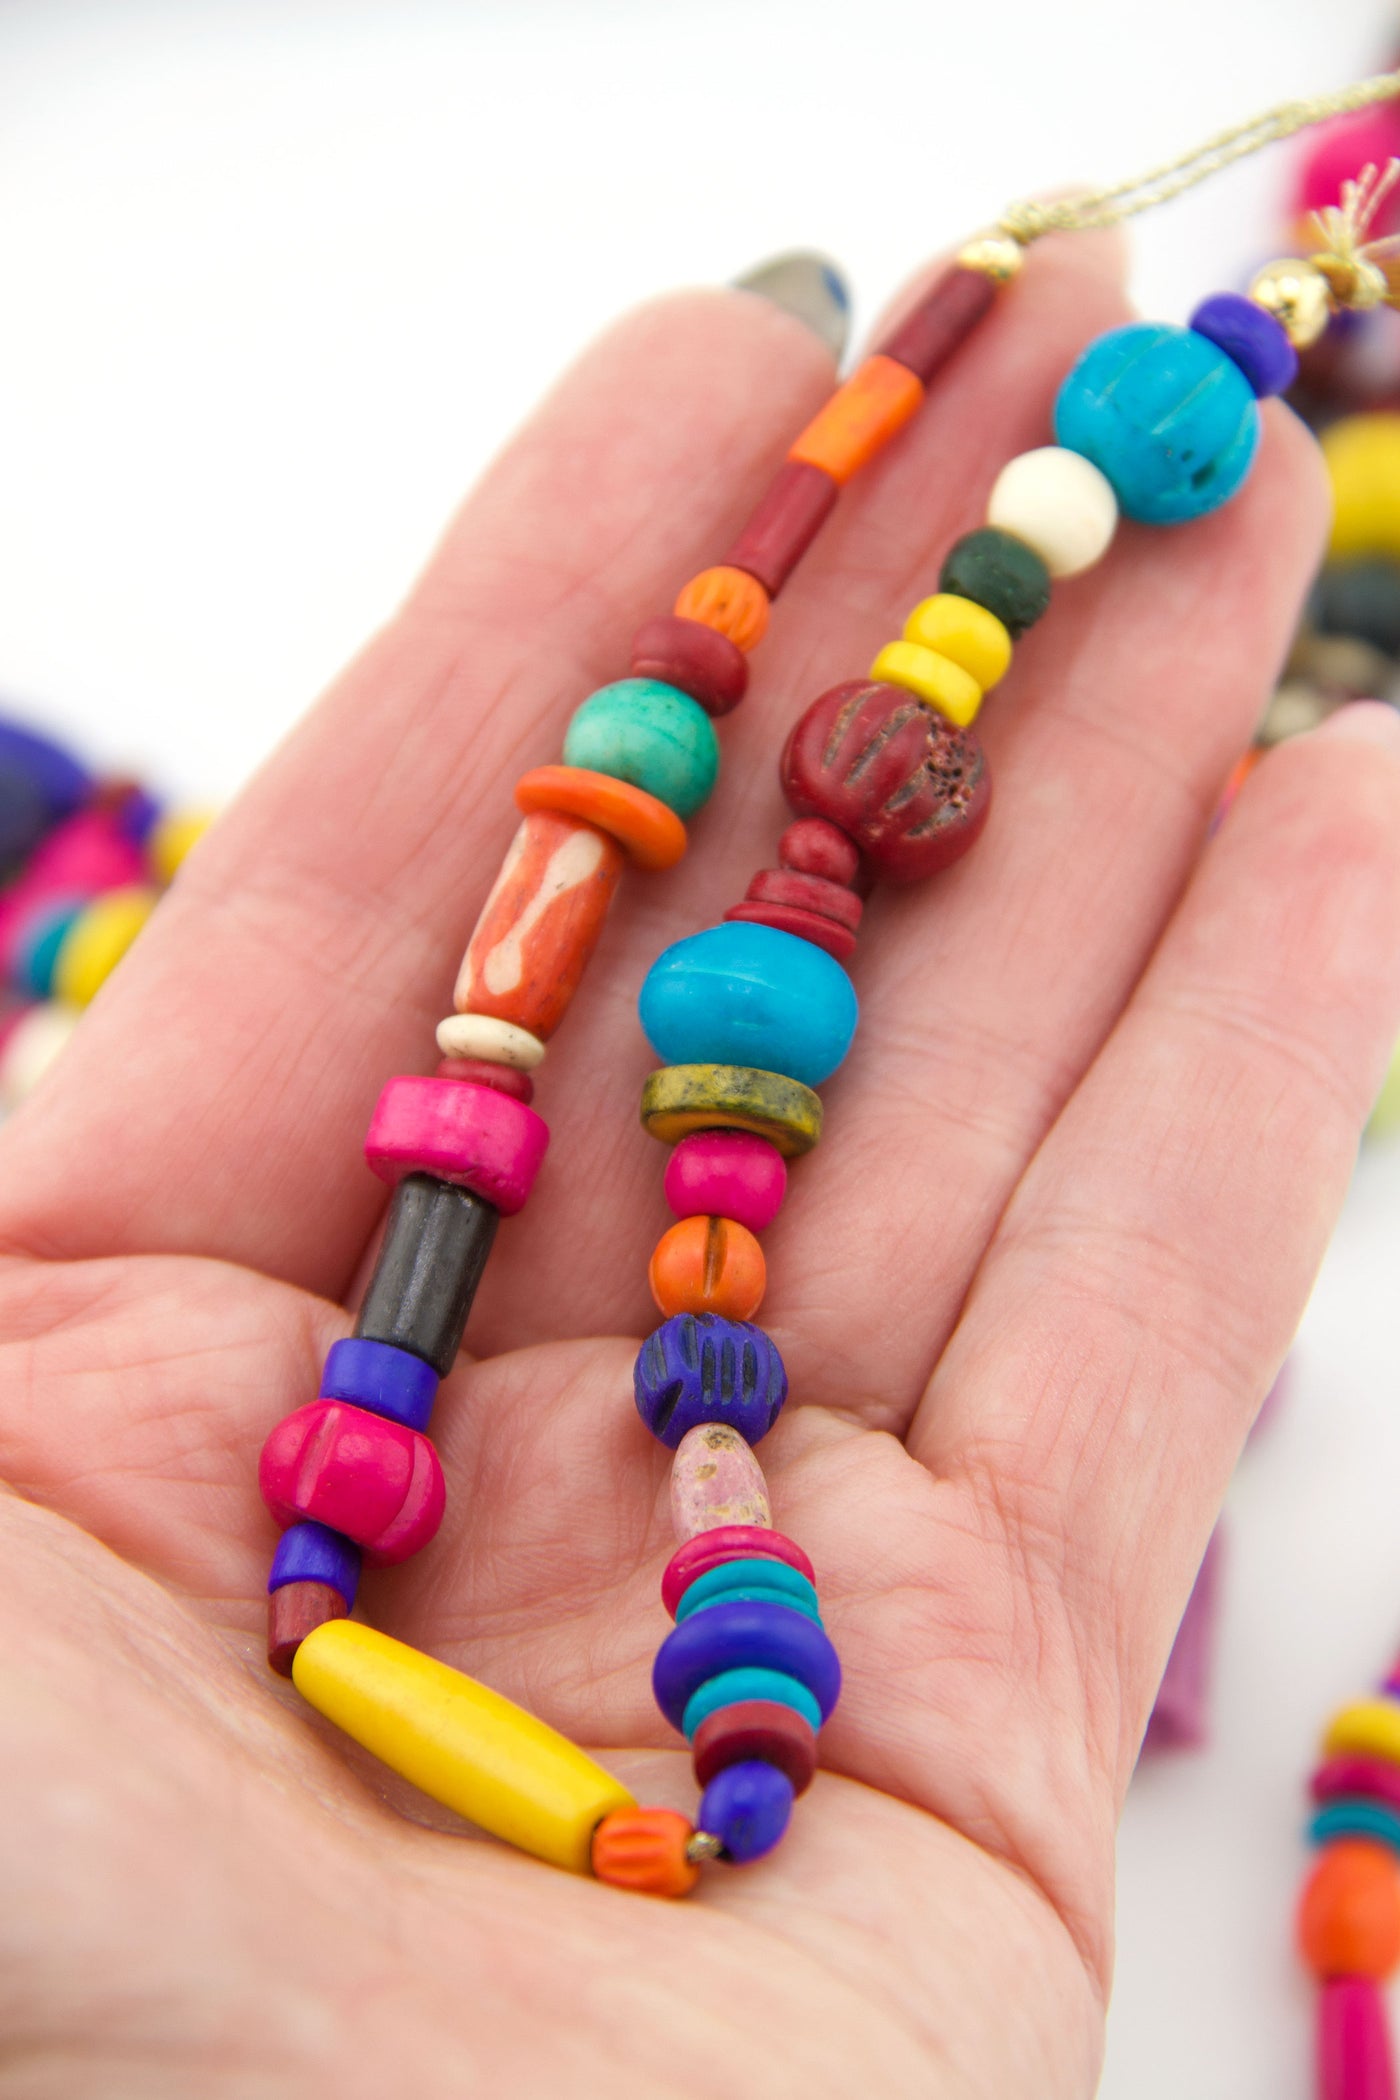 Fiesta Beads: Assorted Colorful Hand Carved Beads for Bracelets, 5-11mm